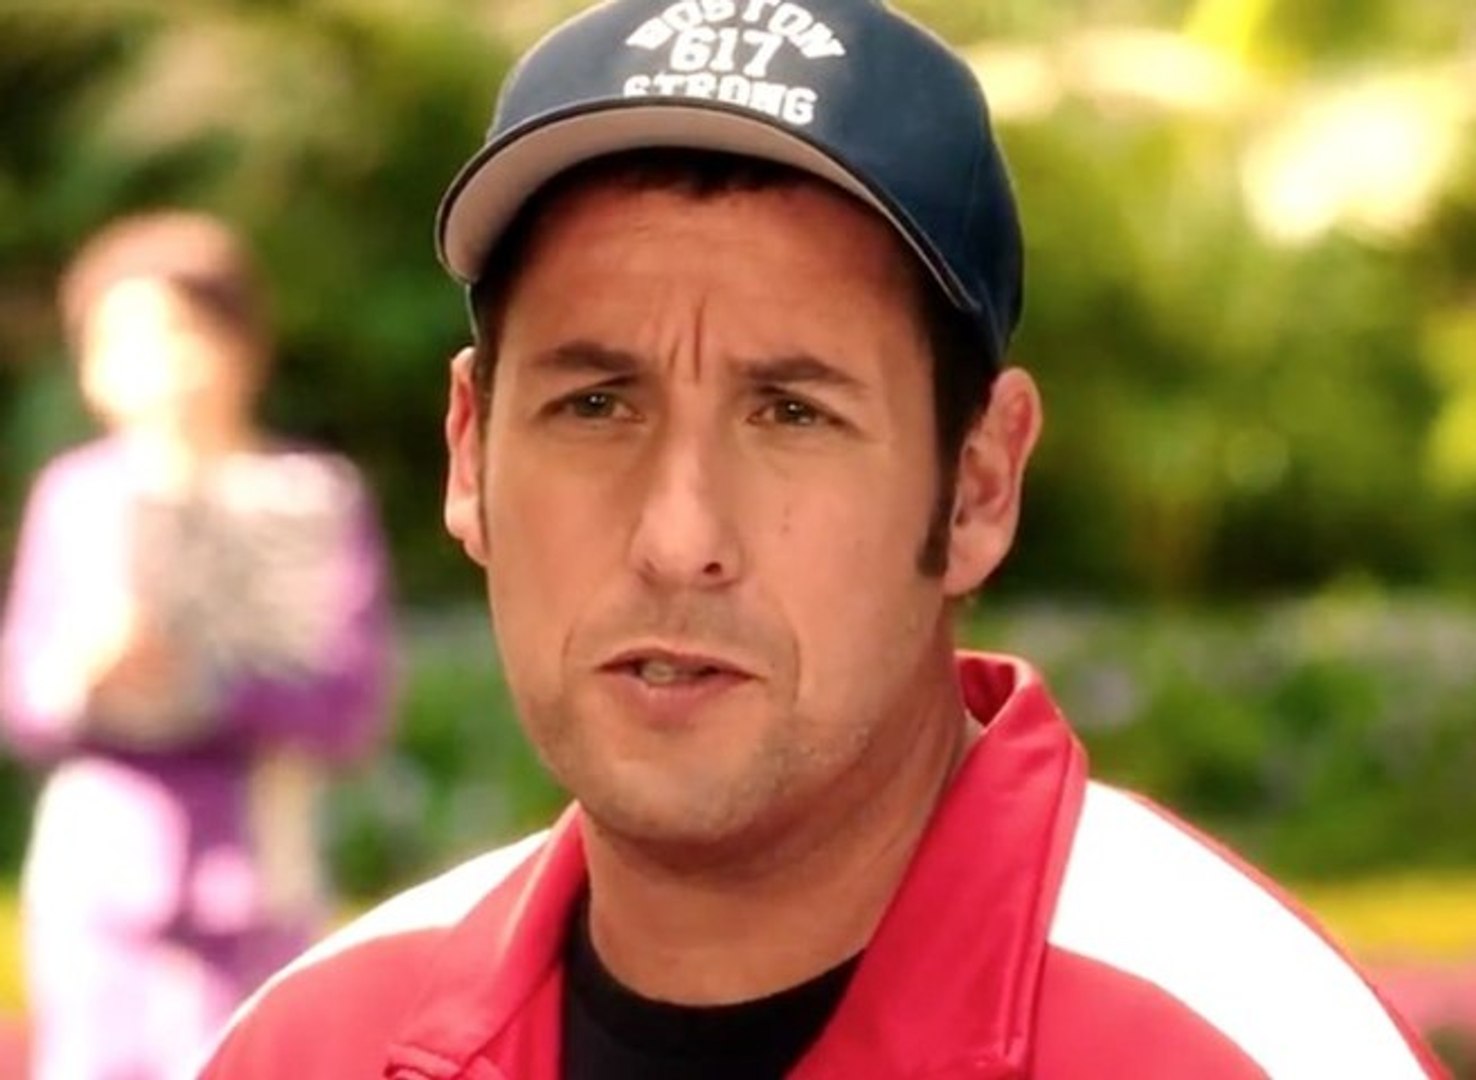 Blended with Adam Sandler and Drew Barrymore – Official Trailer video